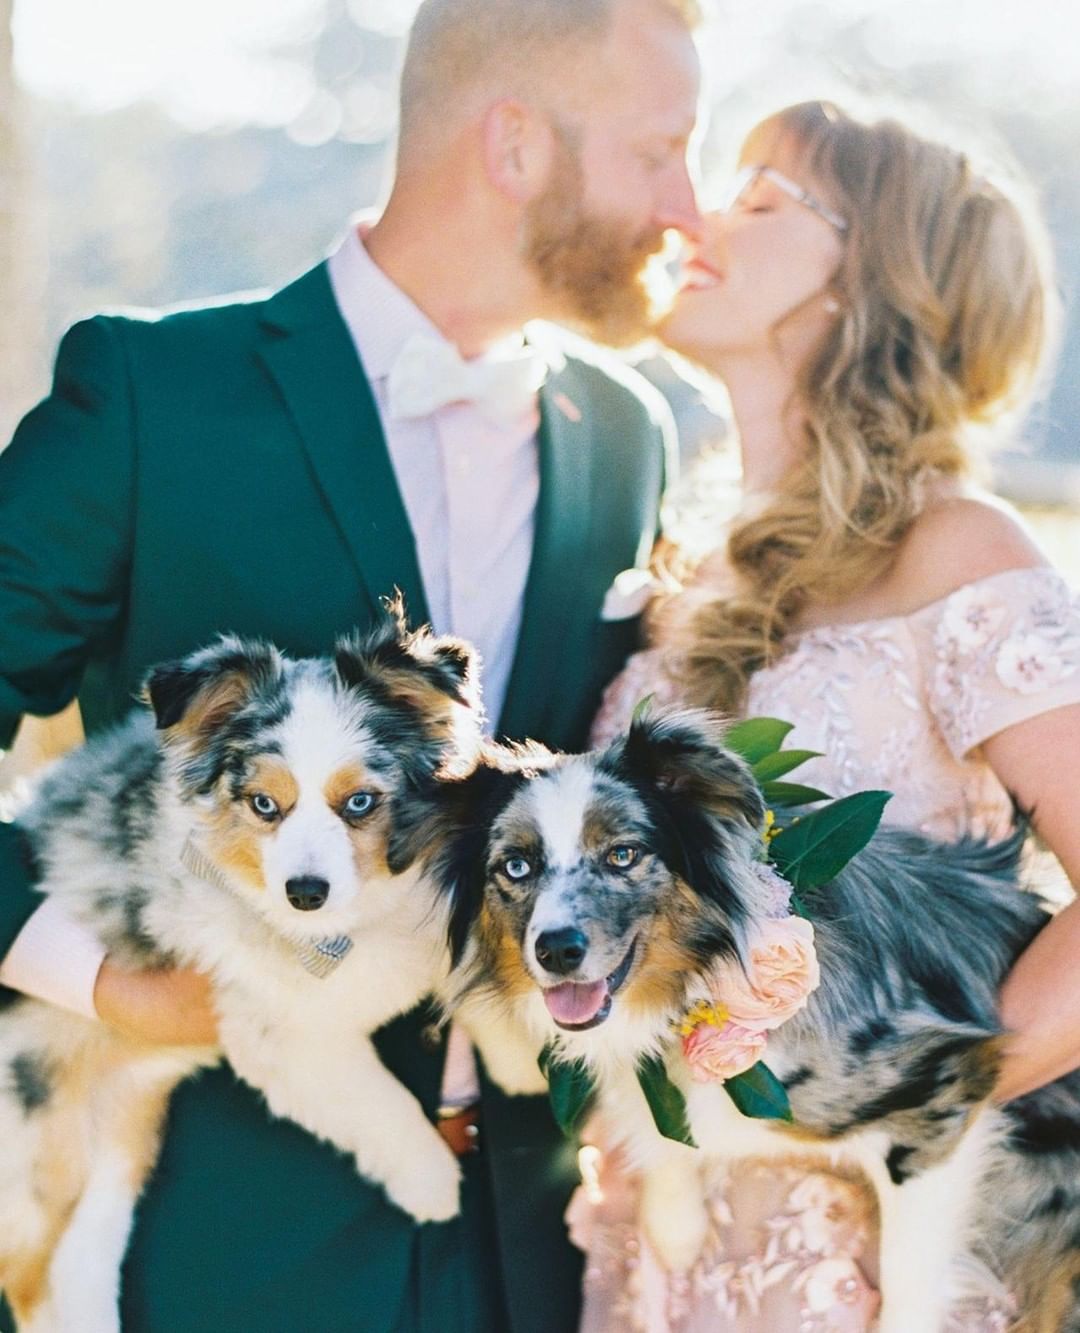 WARNING: These ridiculously cute pictures of dogs in weddings will make your day much better. // Double trouble, double cuteness. // mysweetengagement.com